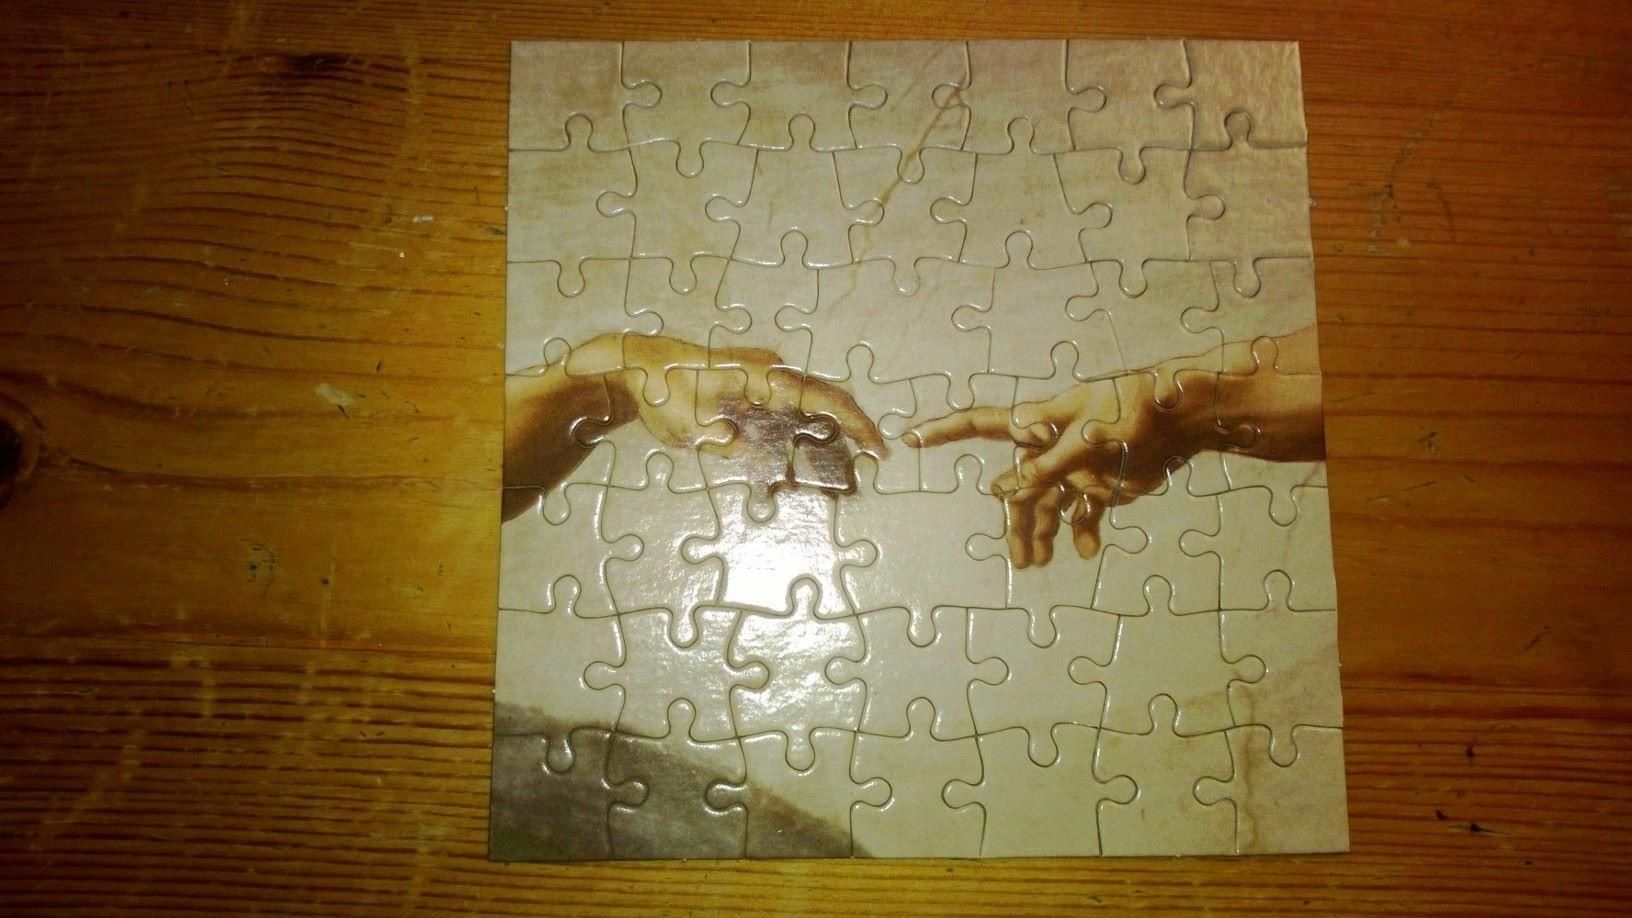 I don’t mean to brag, but I just put a puzzle together in one day, and the box said 2-4 years!